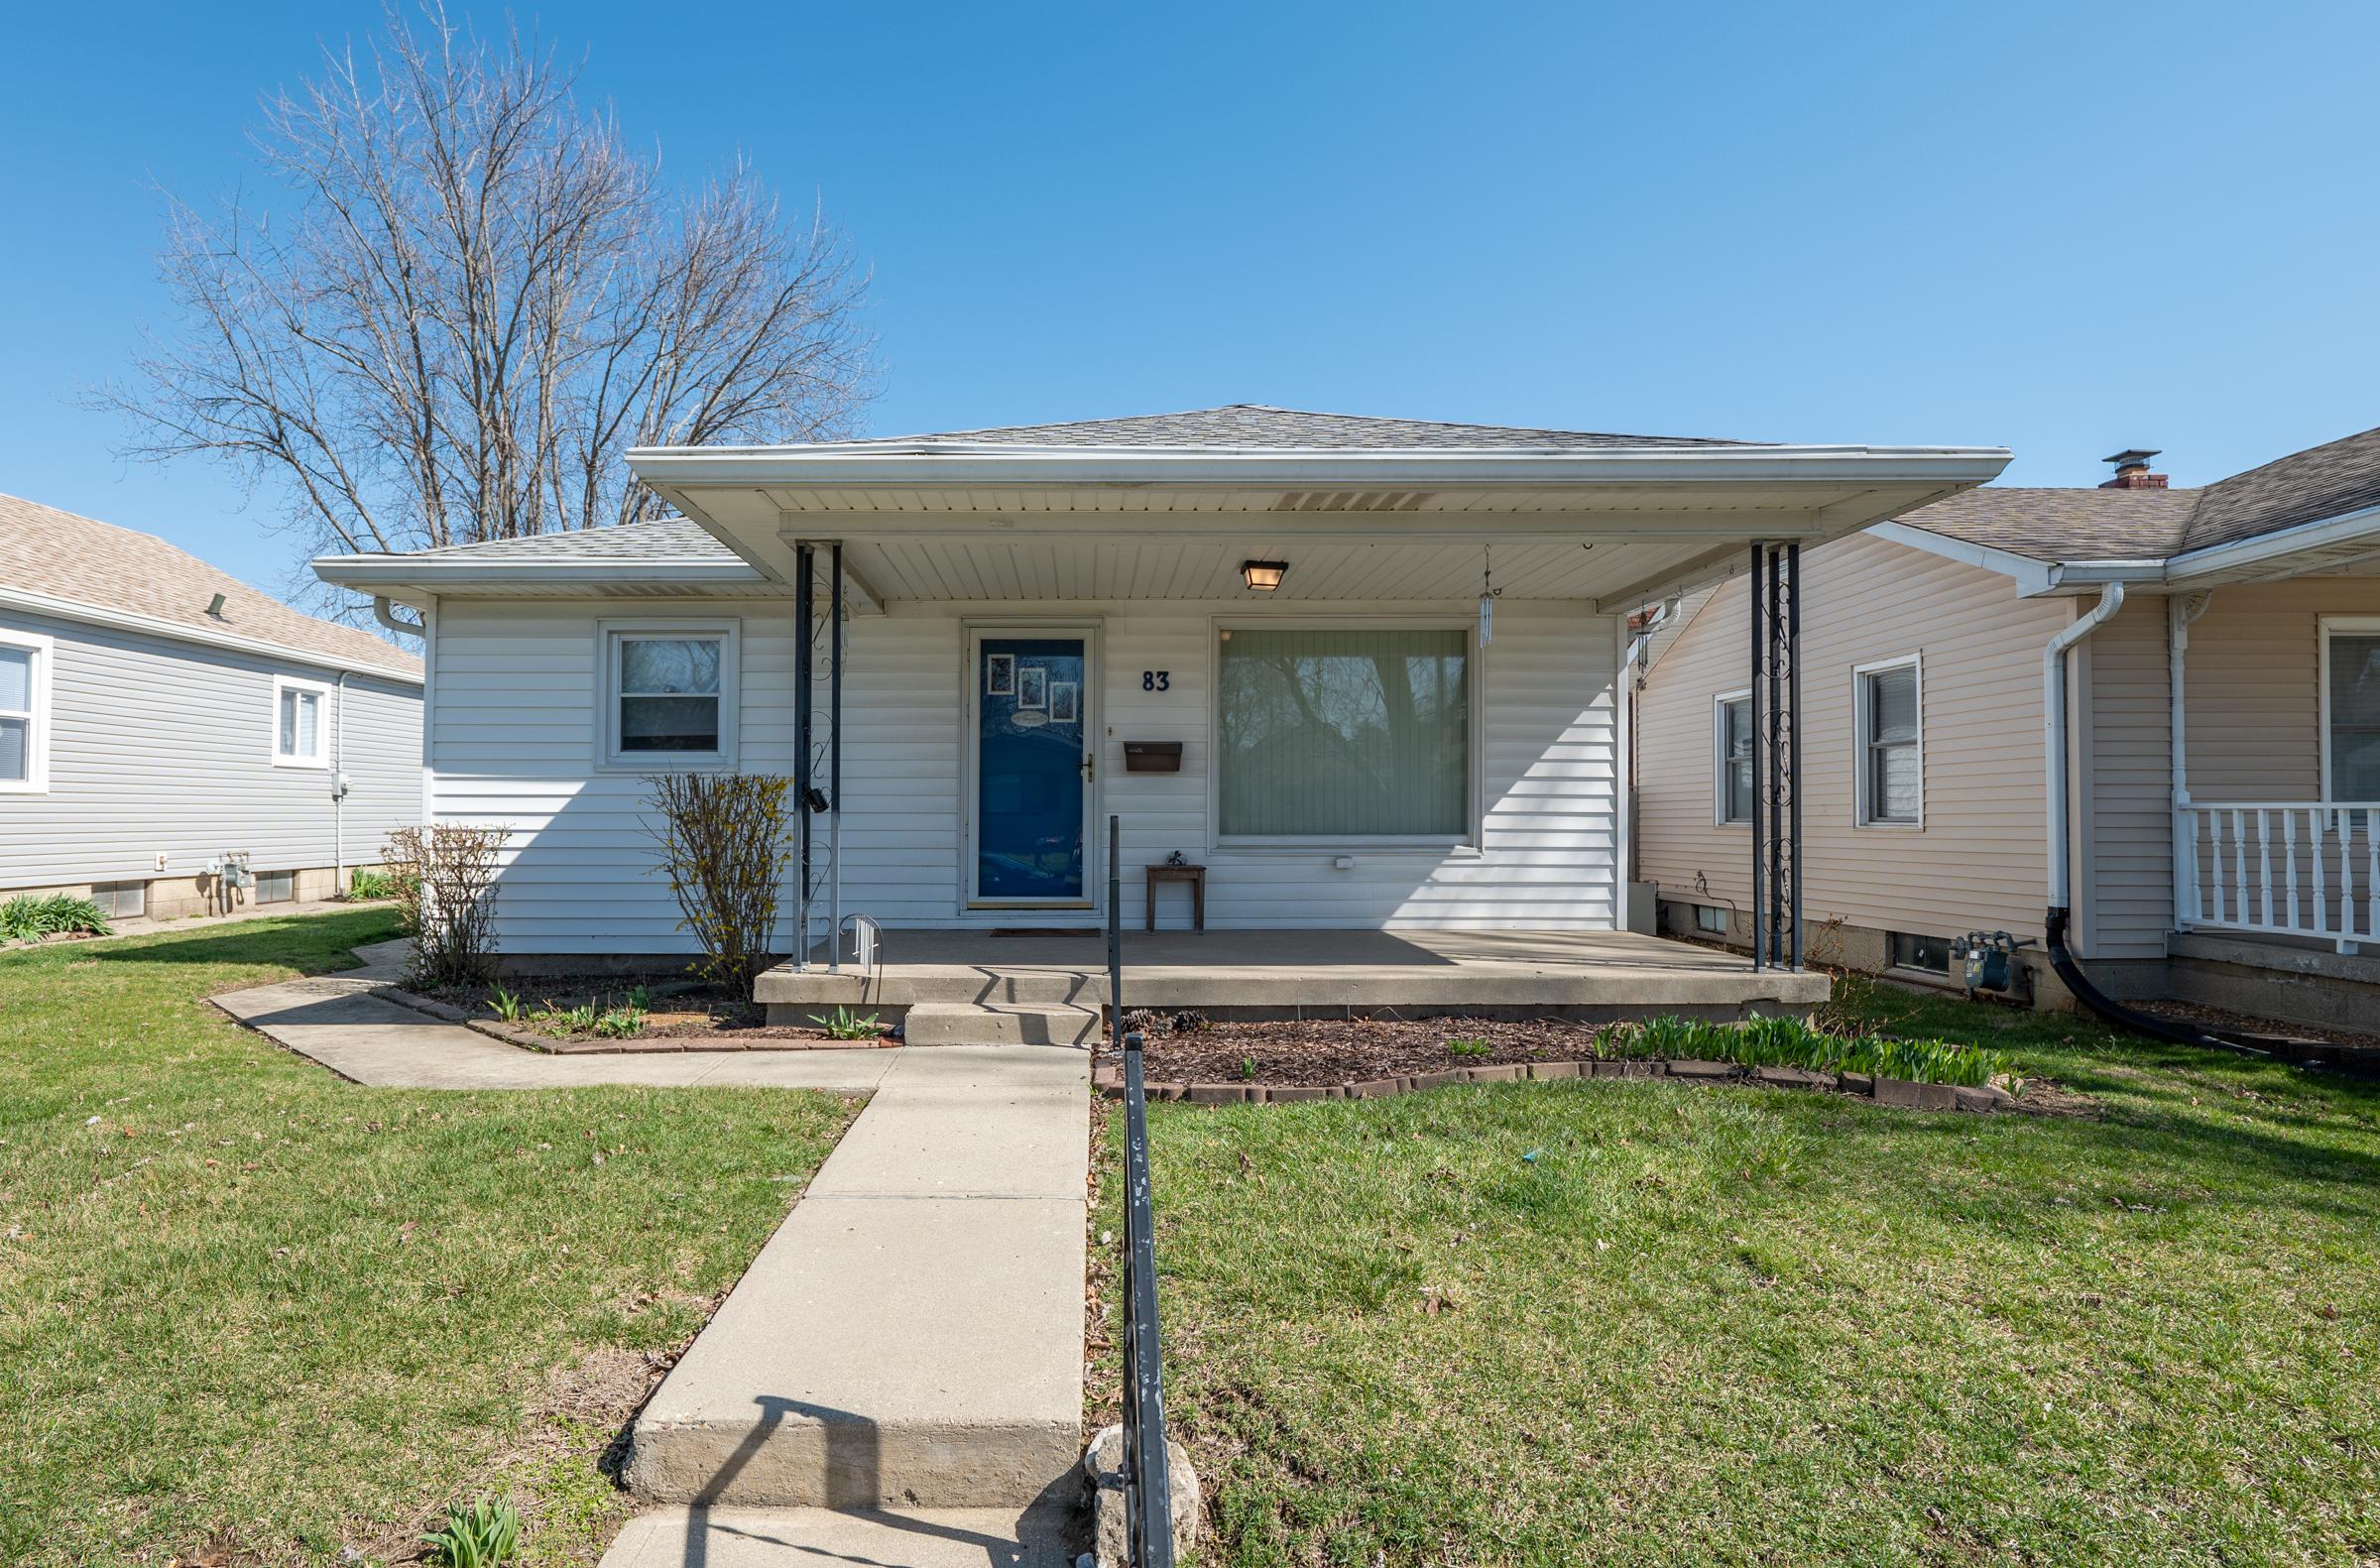 Photo one of 83 S 3Rd Ave Beech Grove IN 46107 | MLS 21968599